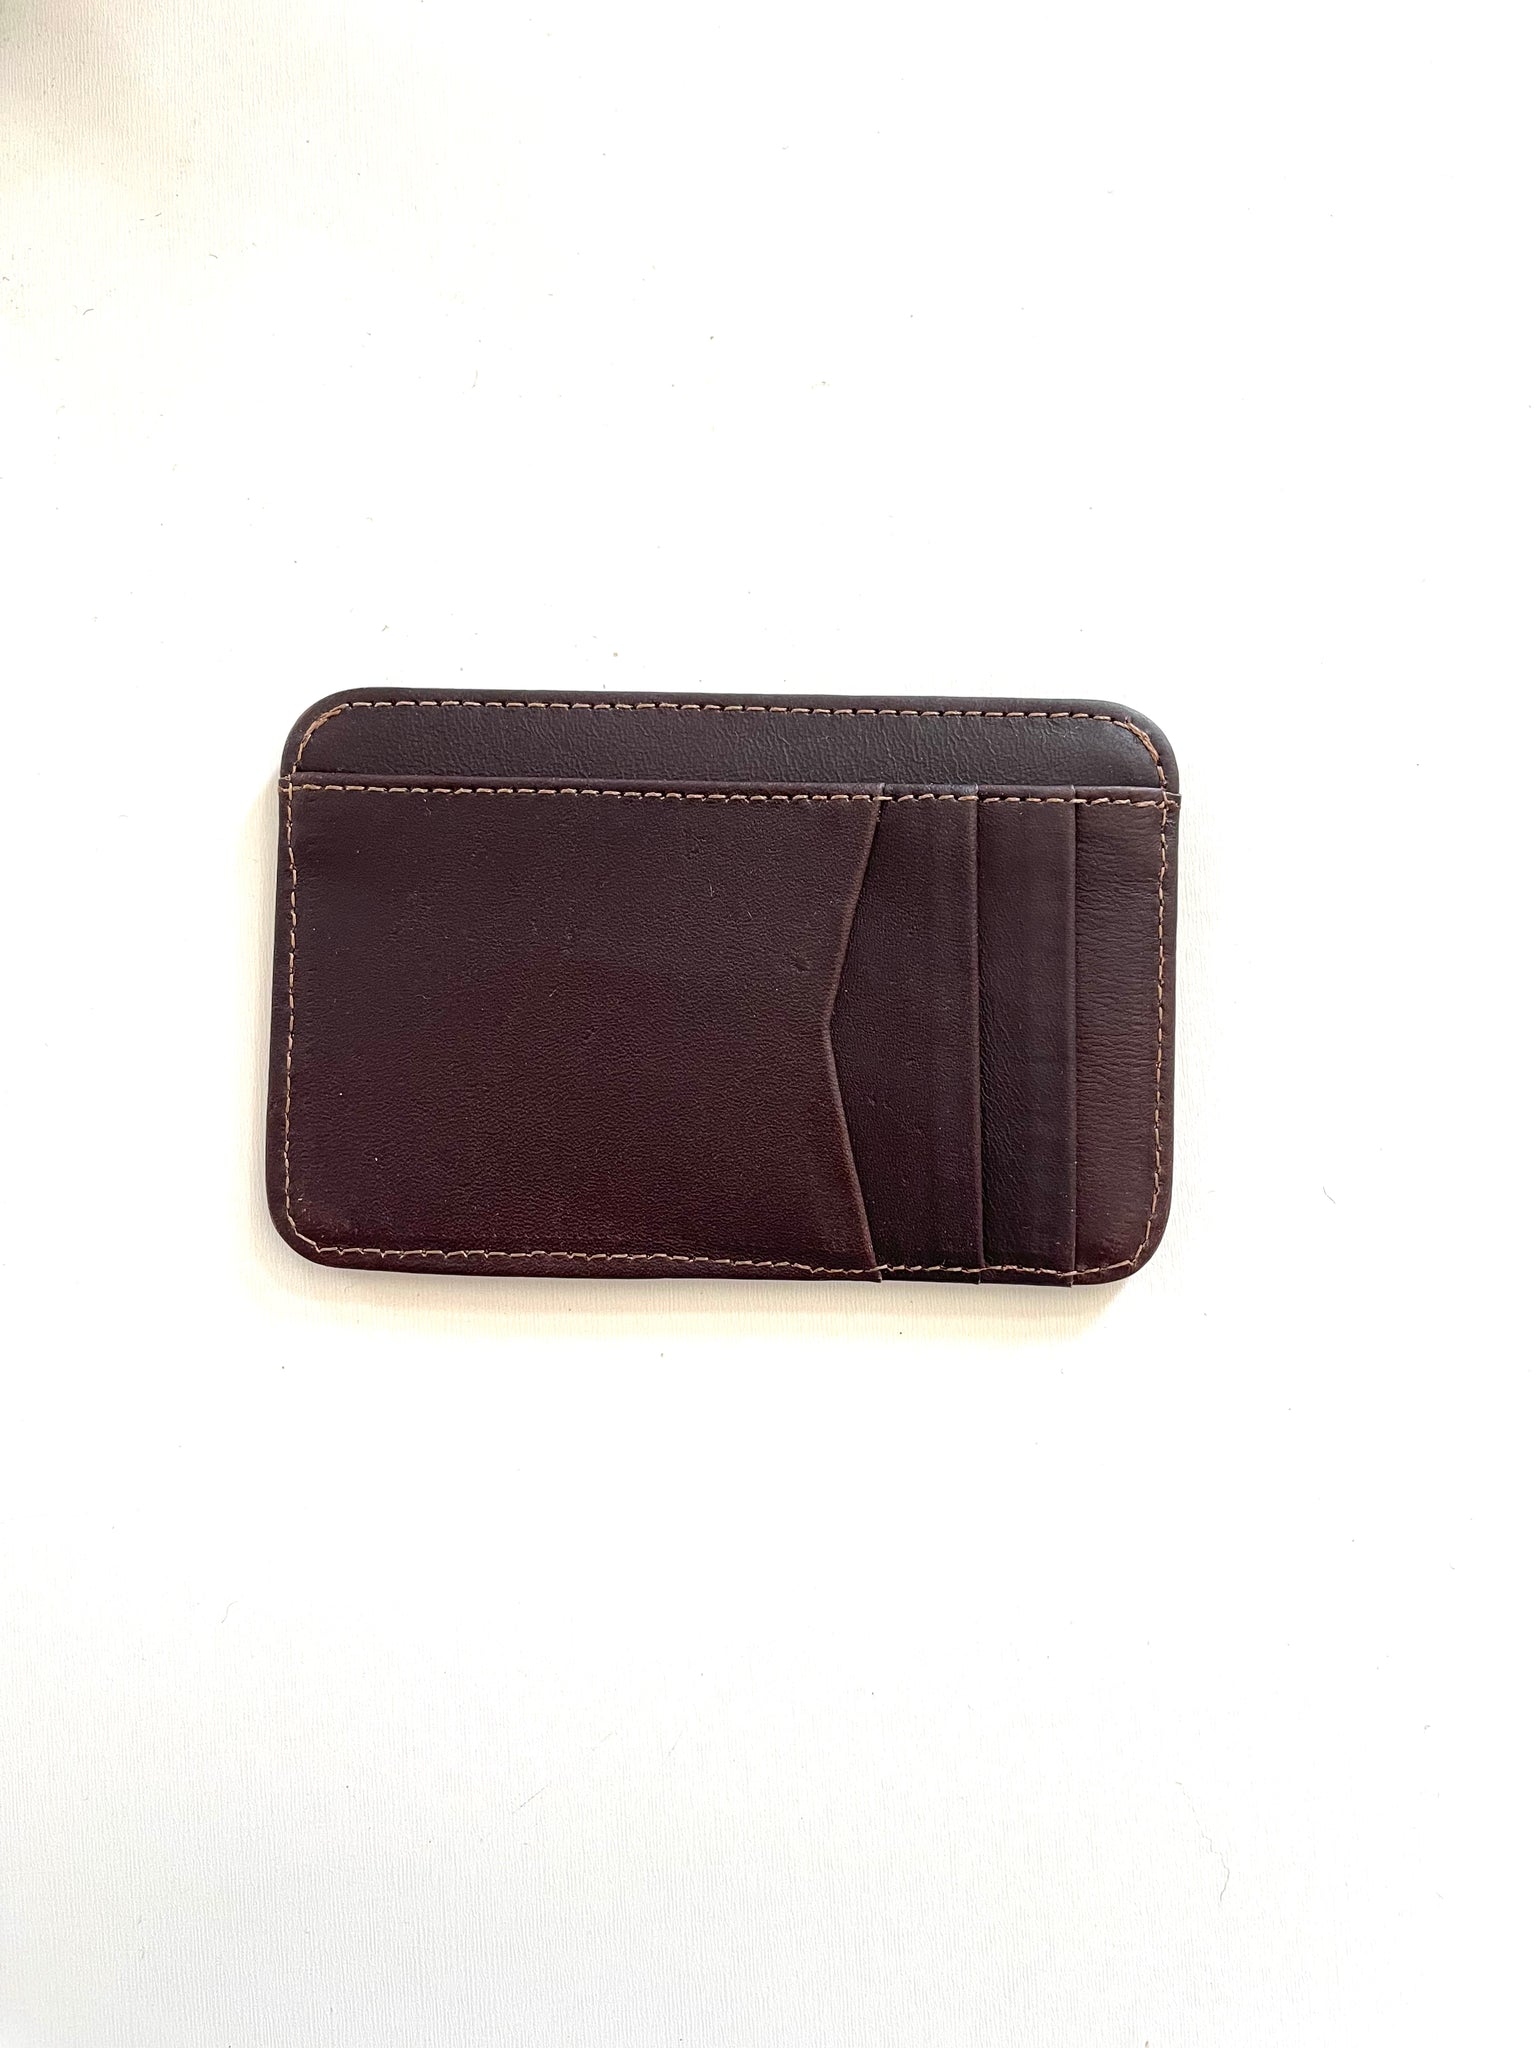 Basic minimalist wallet-one of multiple available